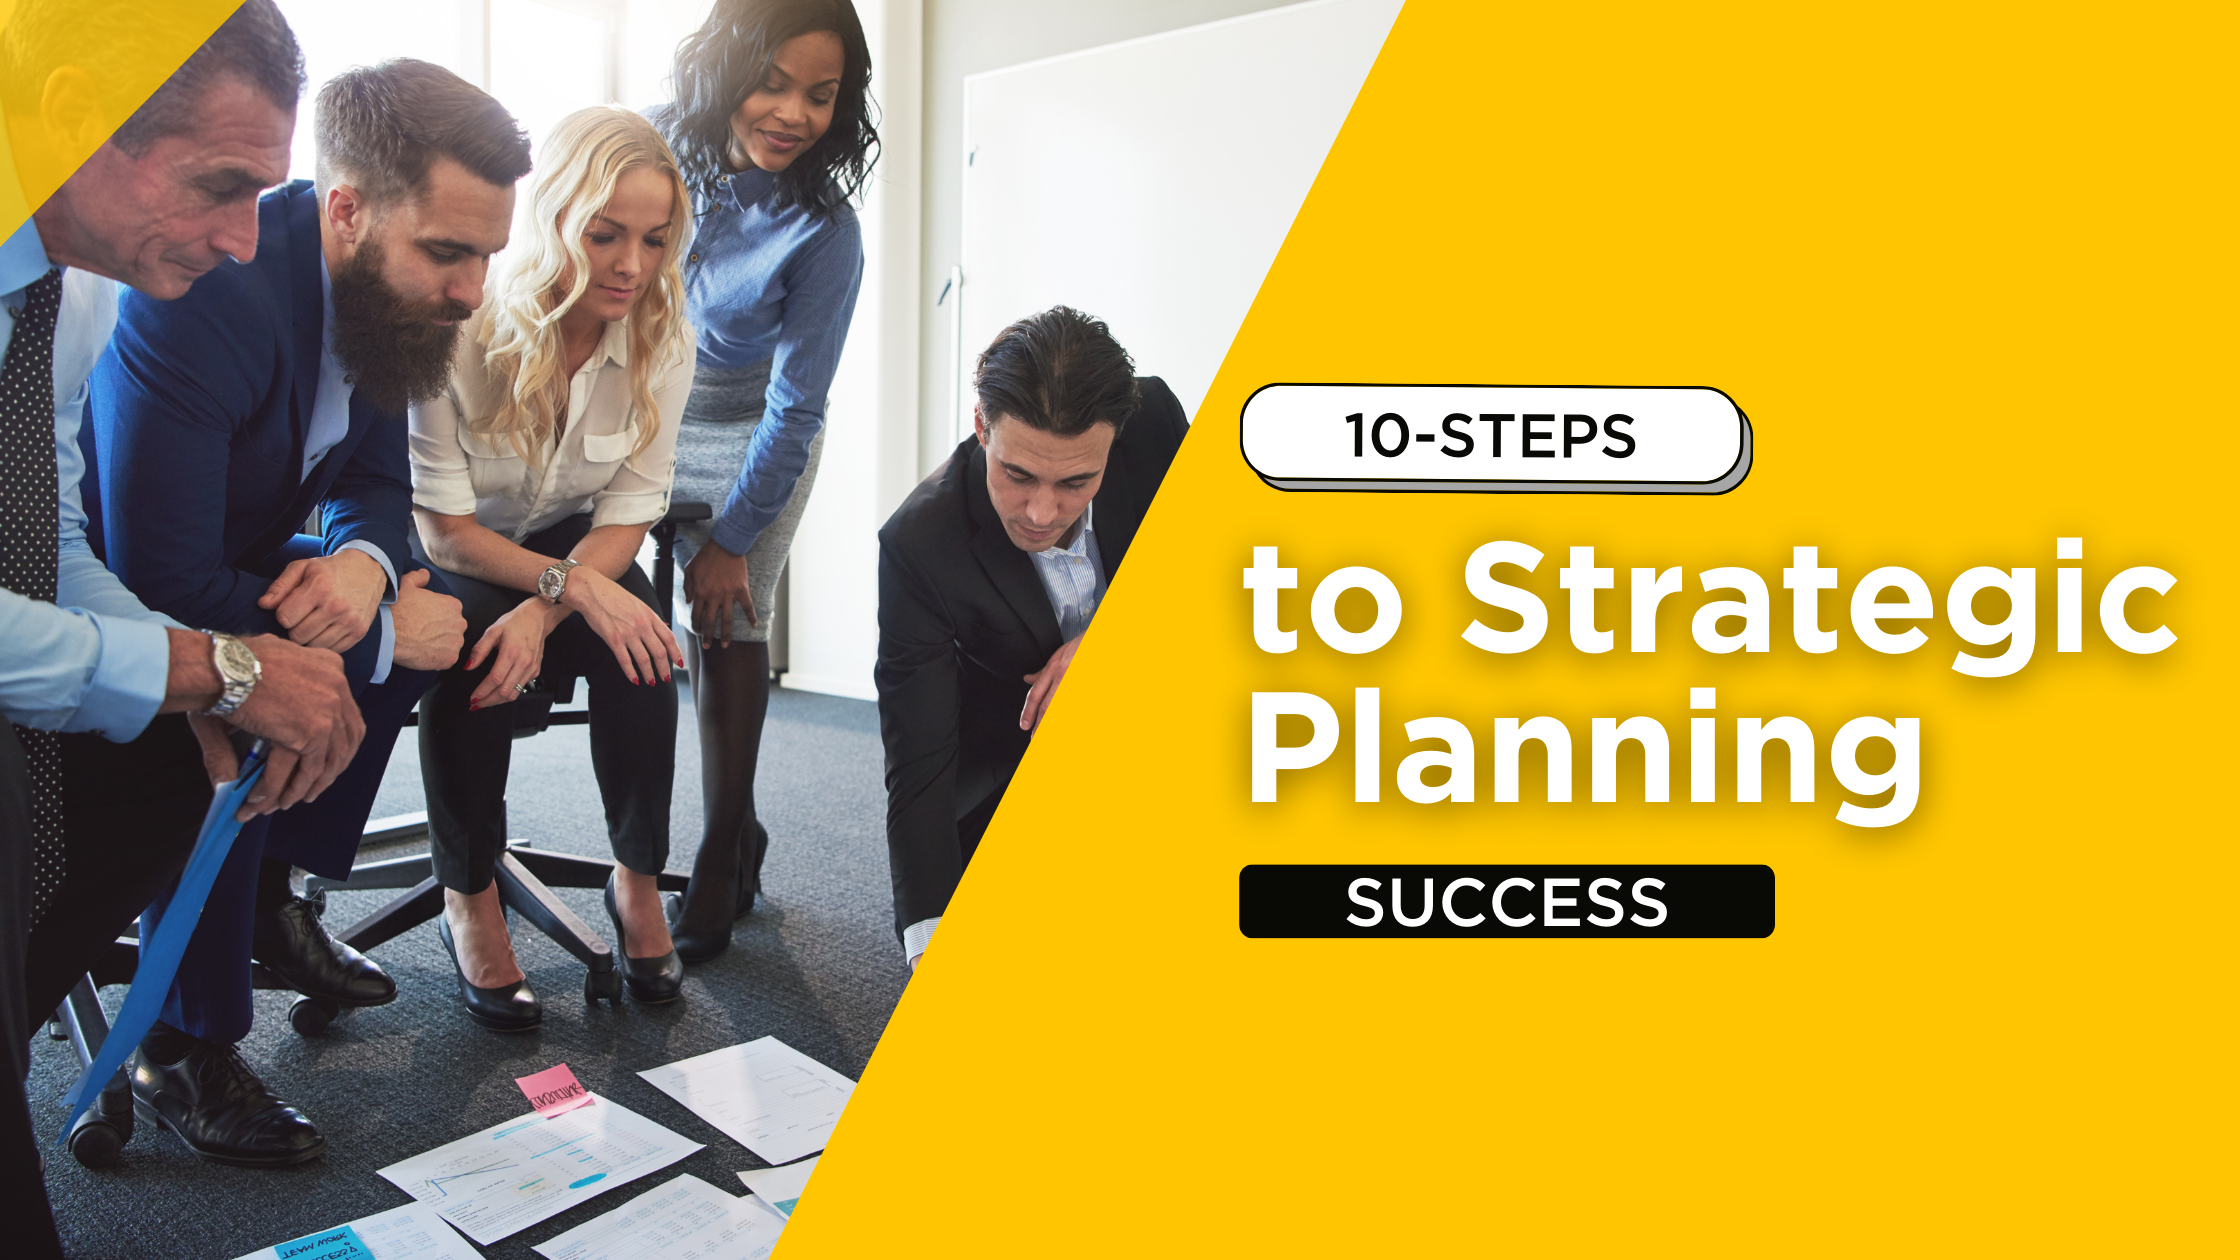 10-steps to strategic planning success.